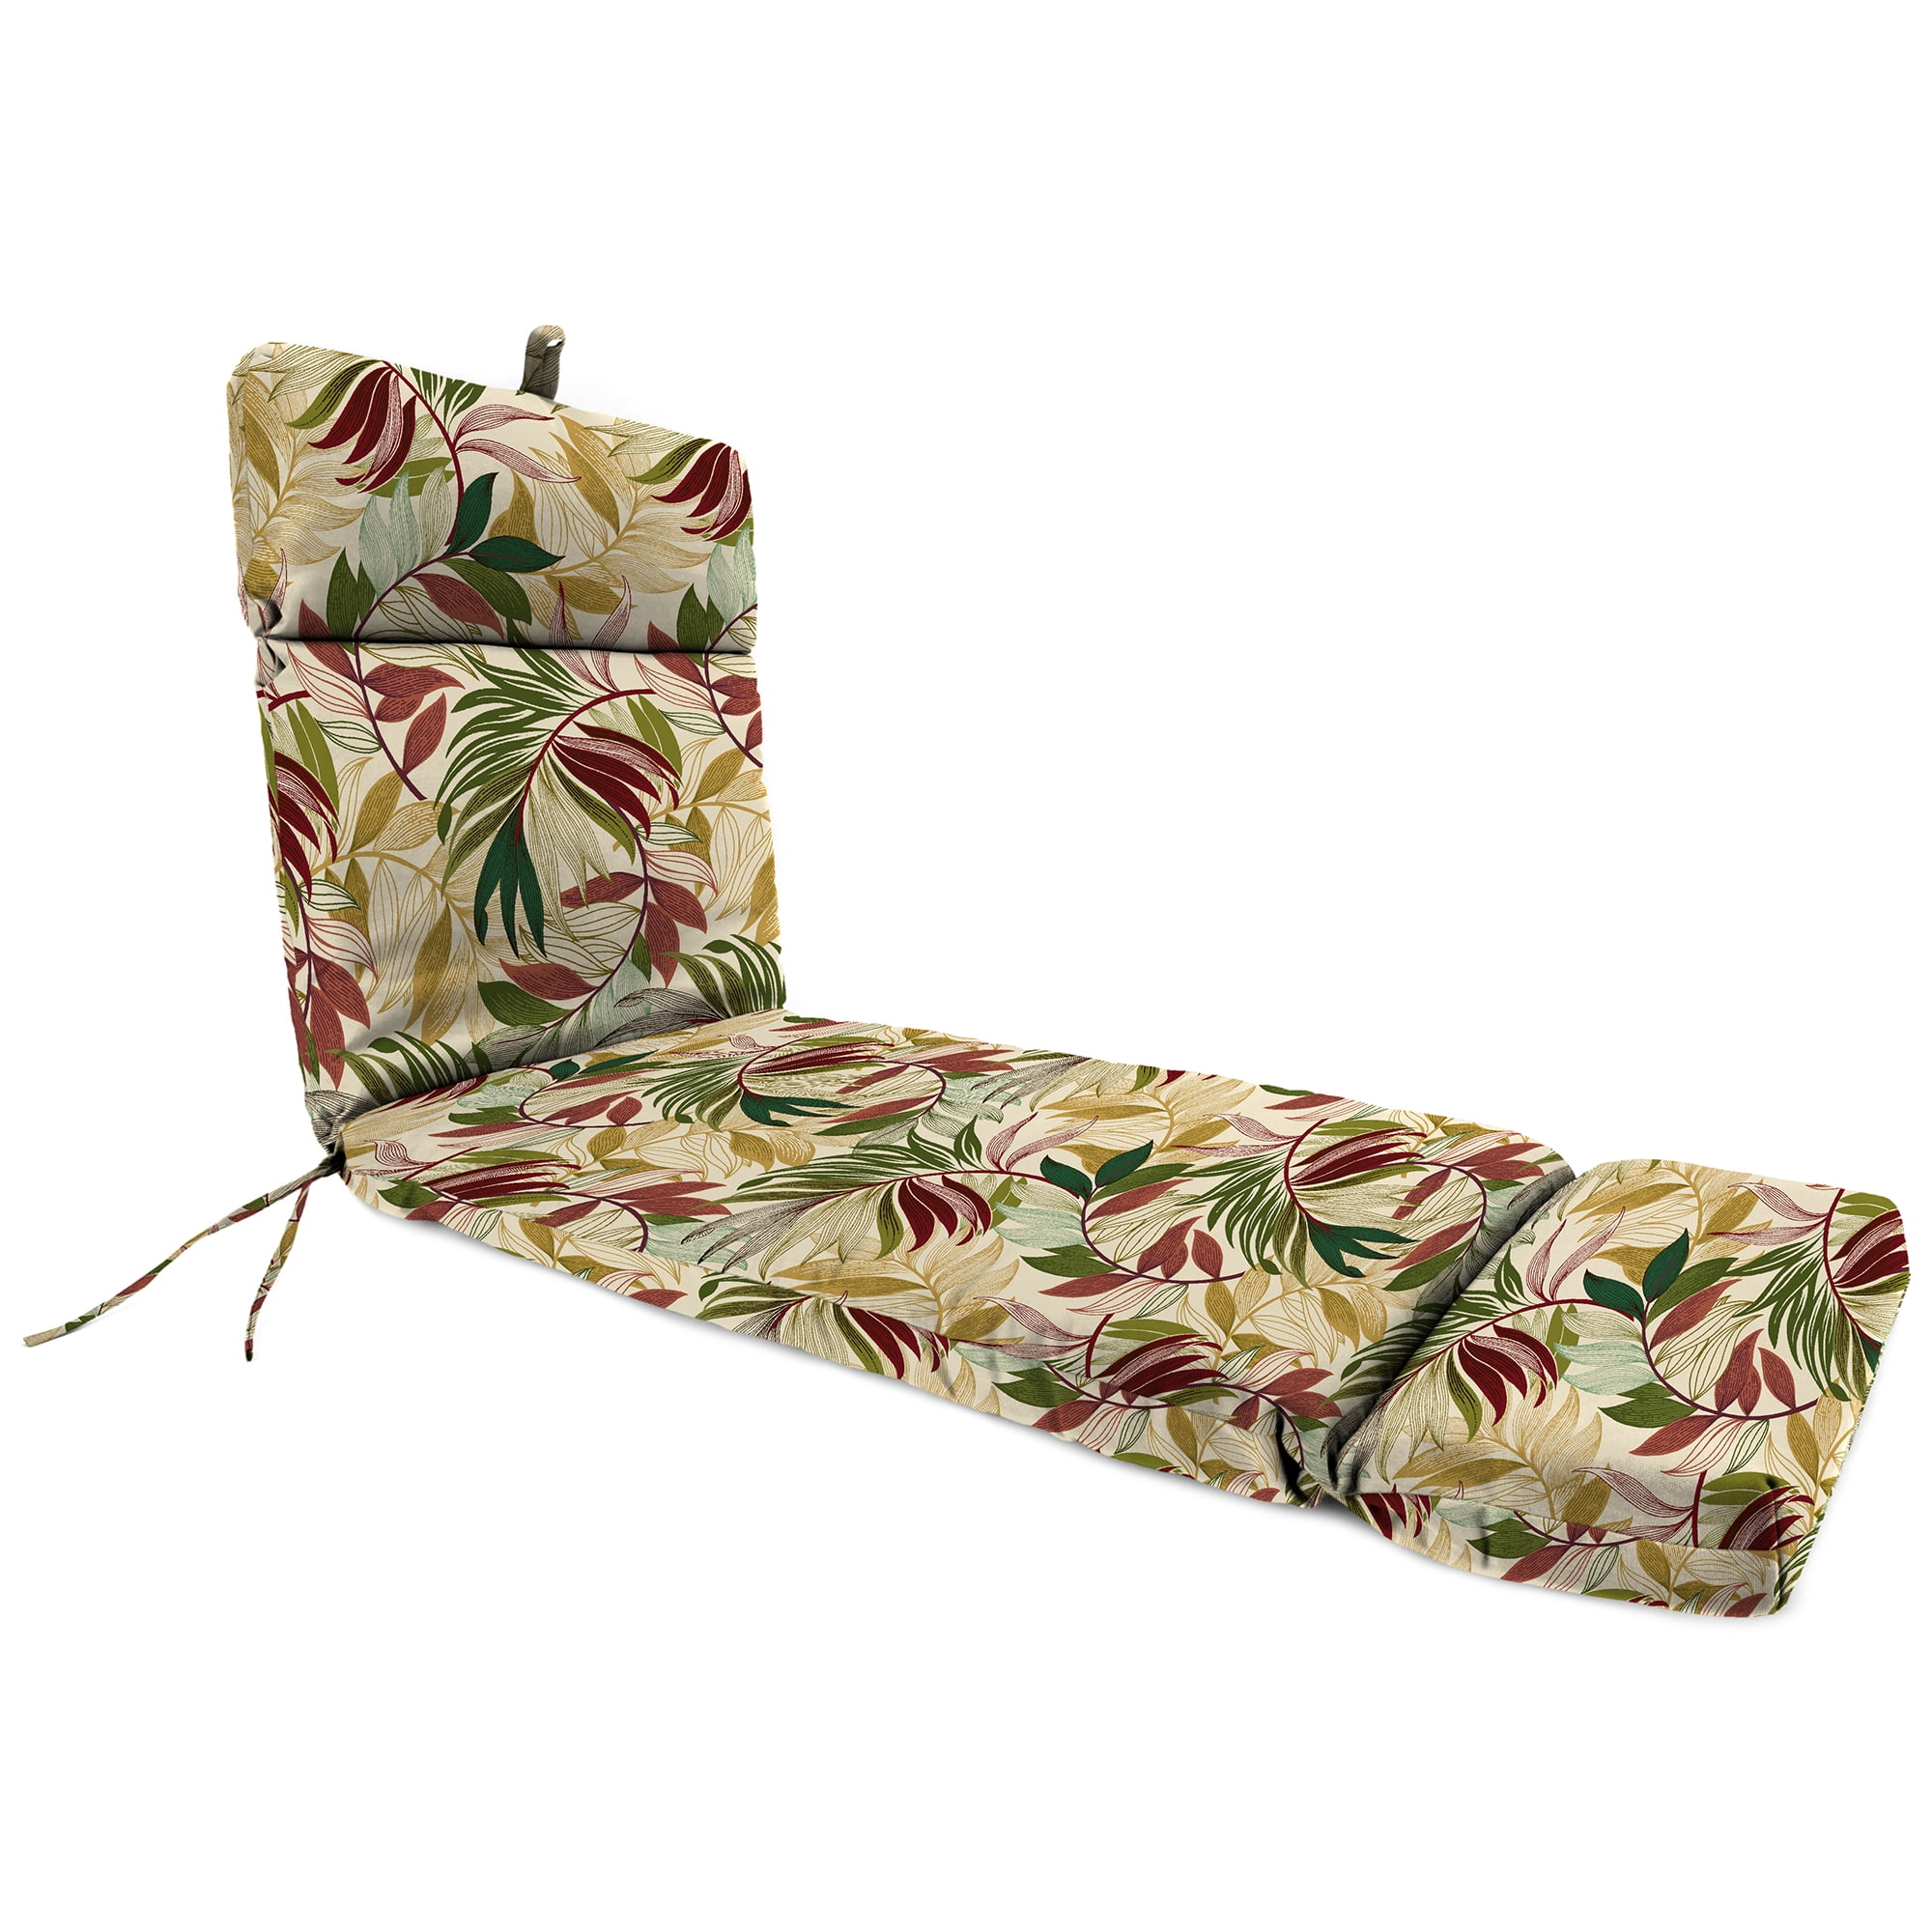 Jordan Manufacturing 72" x 22" Oasis Gem Beige Leaves Rectangular Outdoor Chaise Lounge Cushion with Ties and Hanger Loop - image 1 of 15